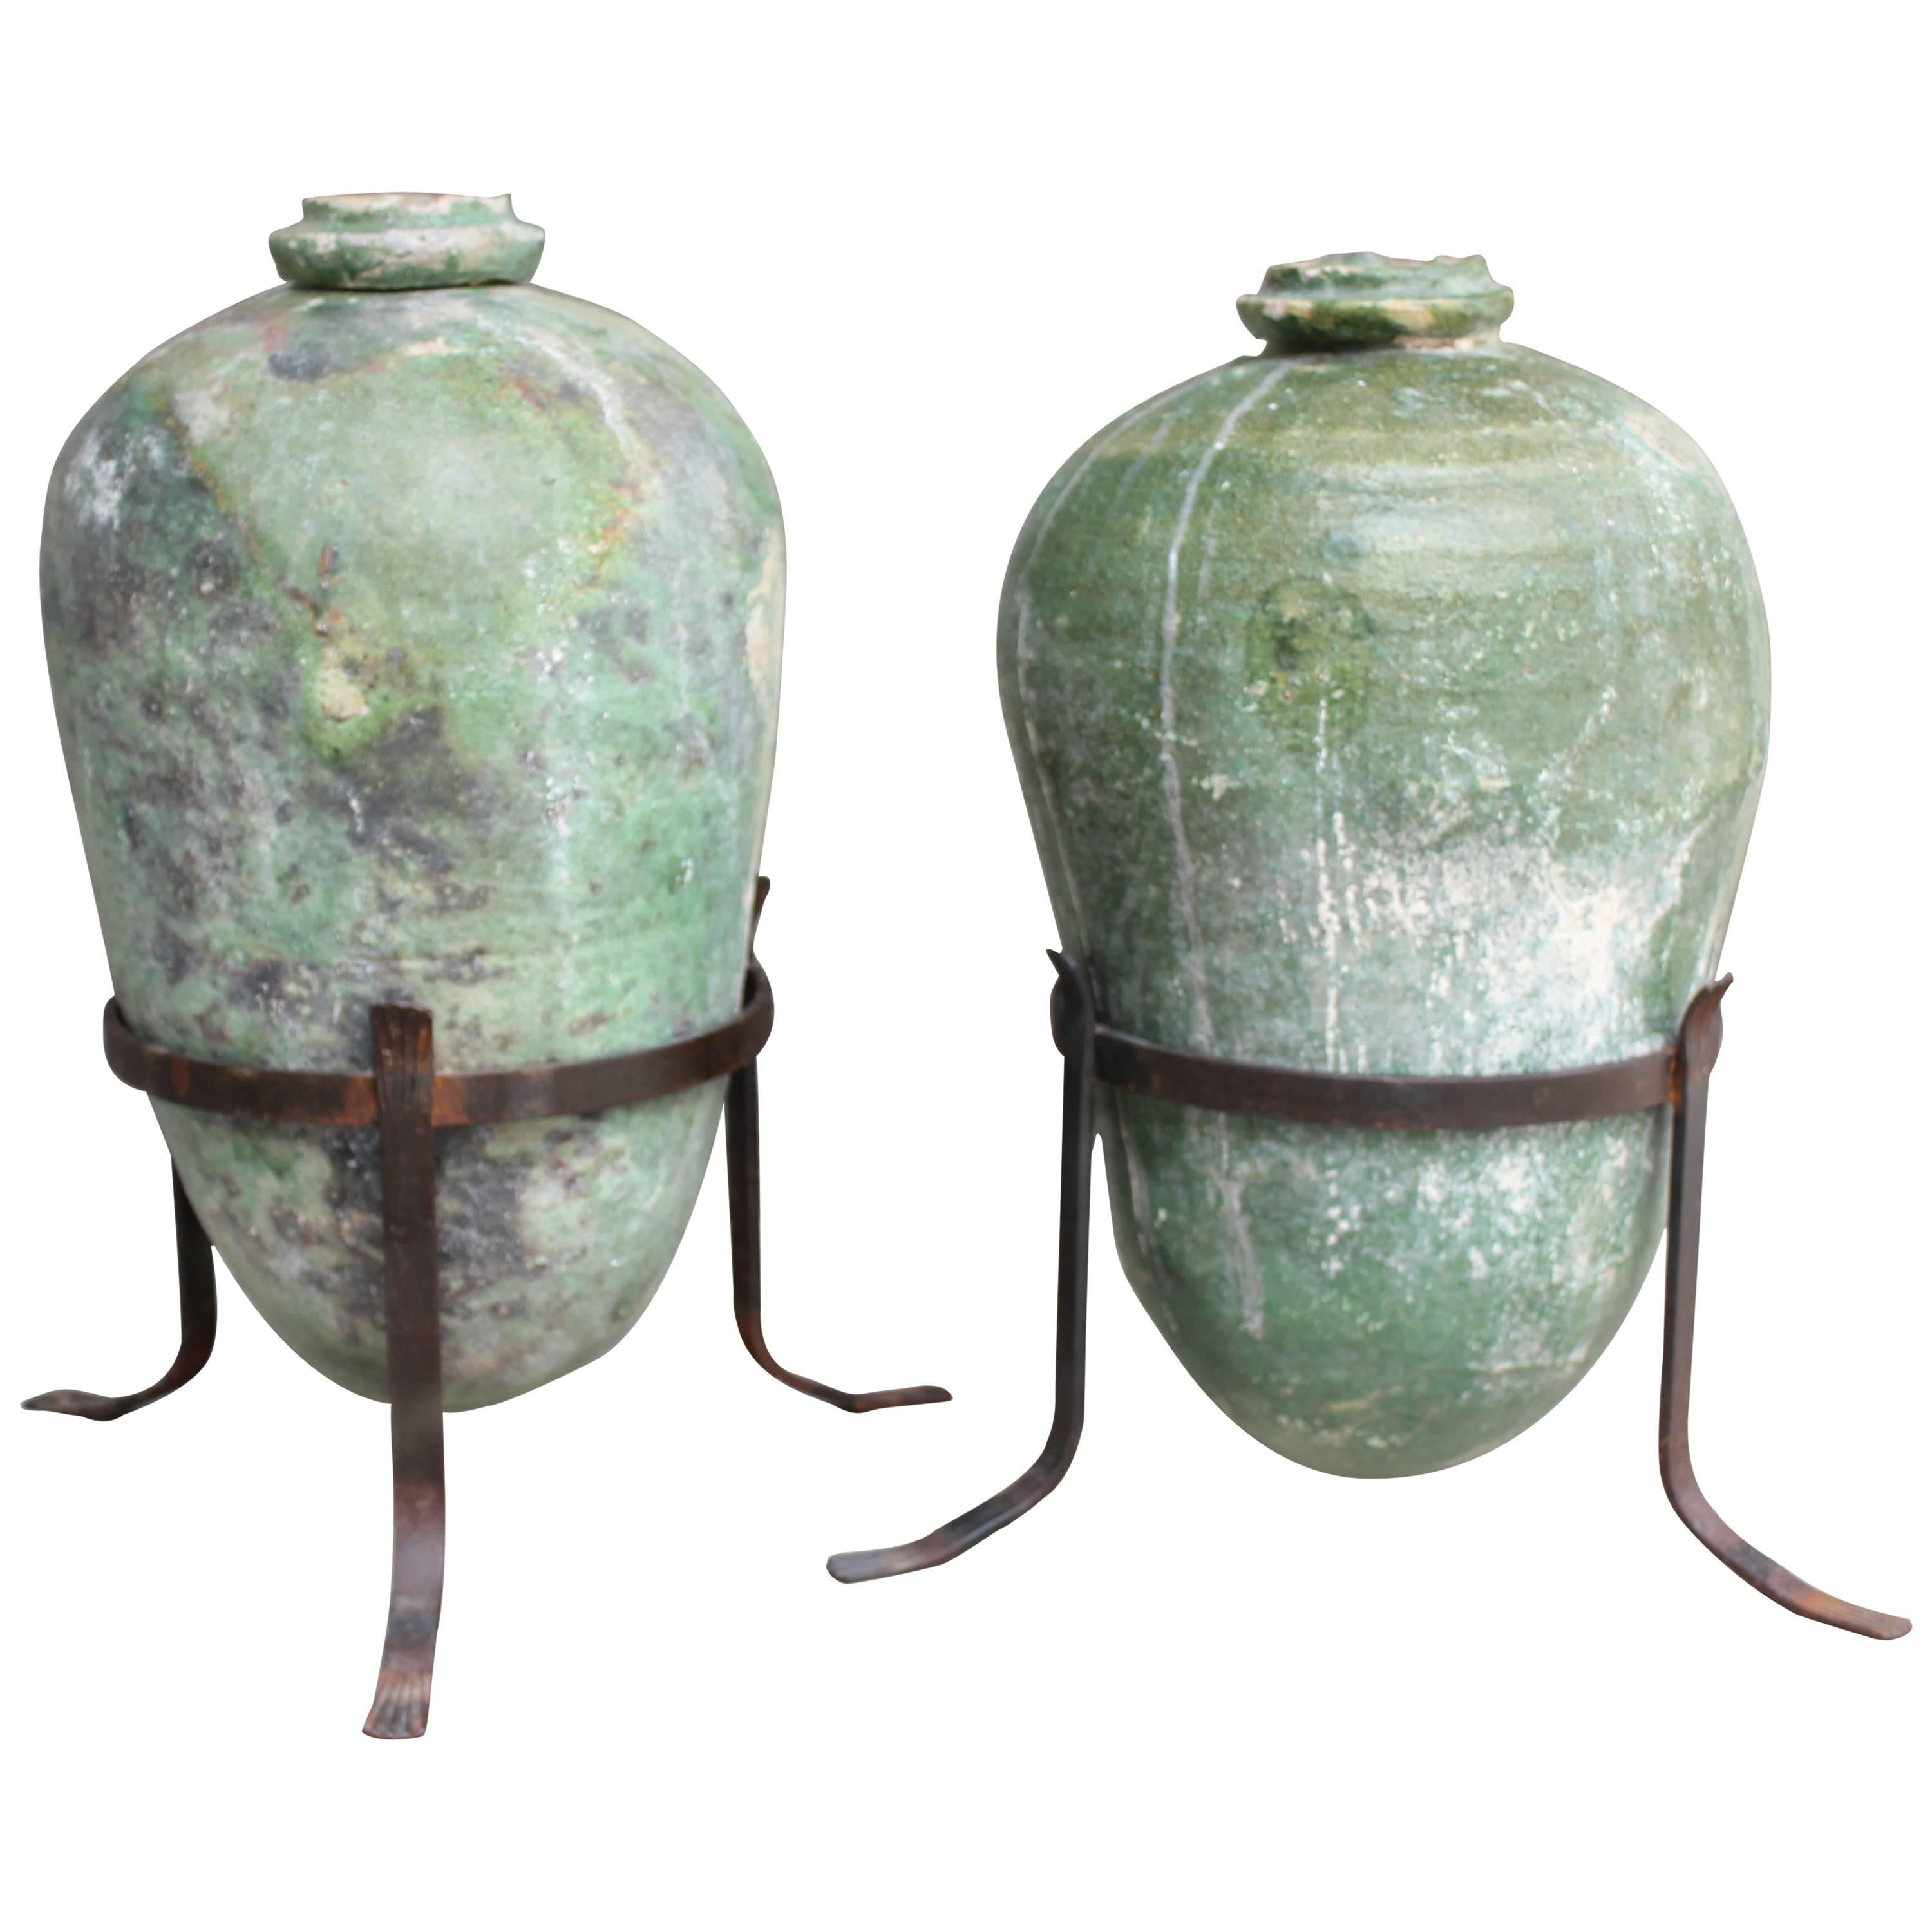 Pair of 17th Century Spanish Urns with Wrought Iron Stands